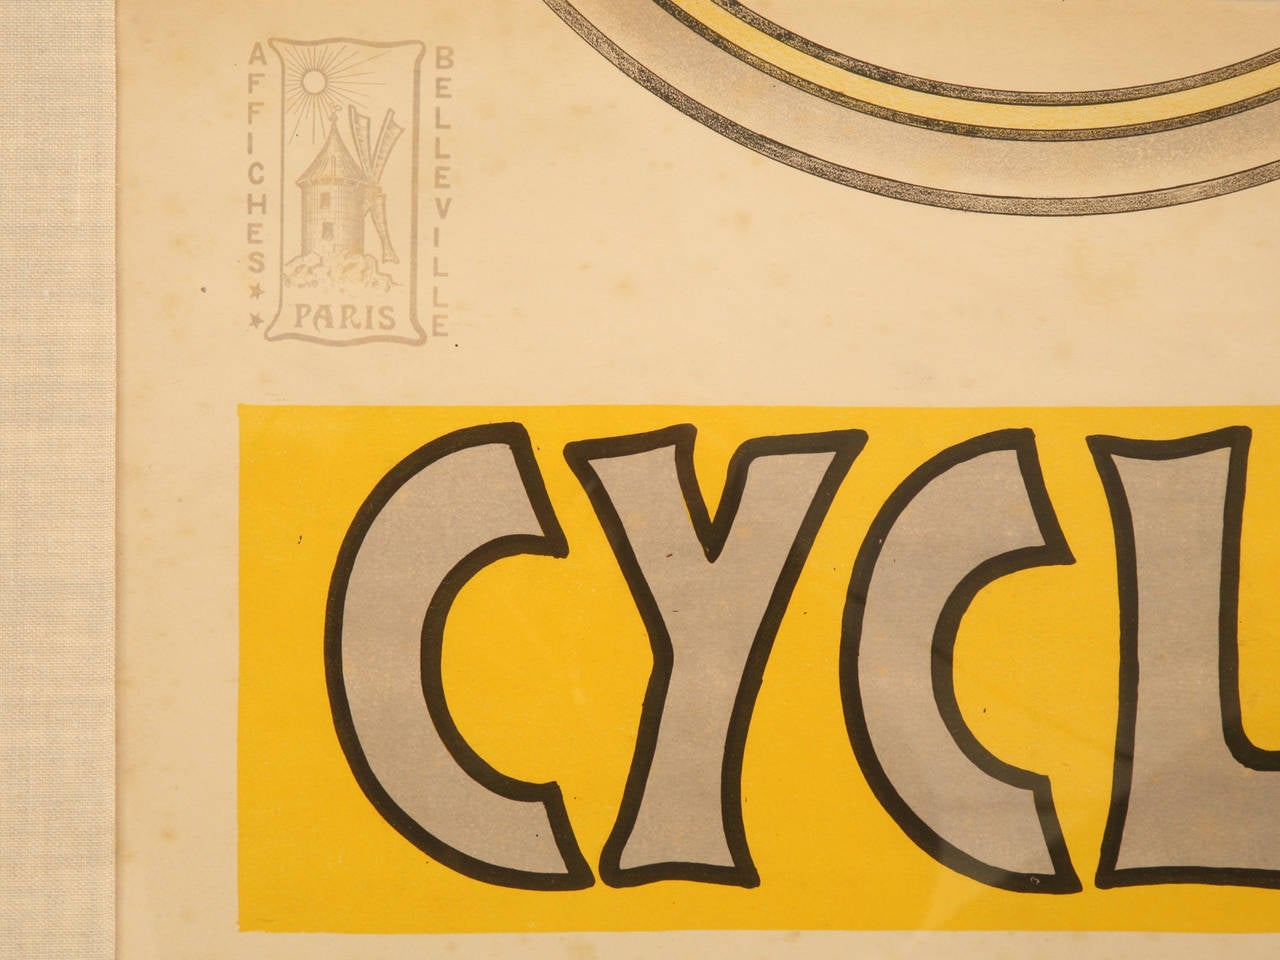 Bicycle Poster from Dijon, France circa 1905 by Rene Vincent, 1stdibs New York 1